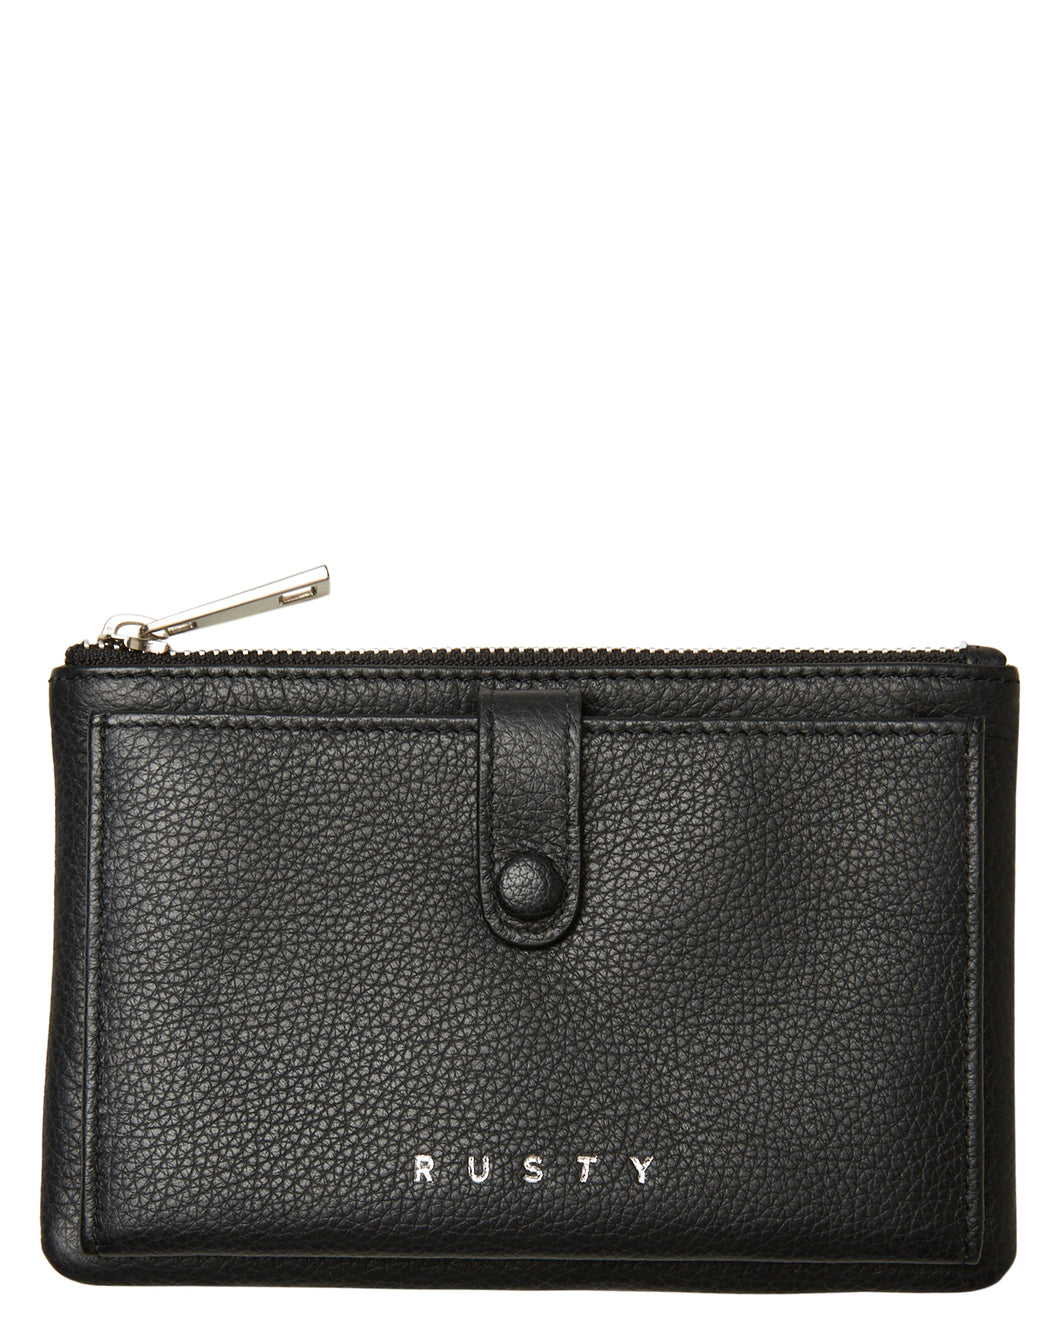 RUSTY Grace Leather Pouch - Black